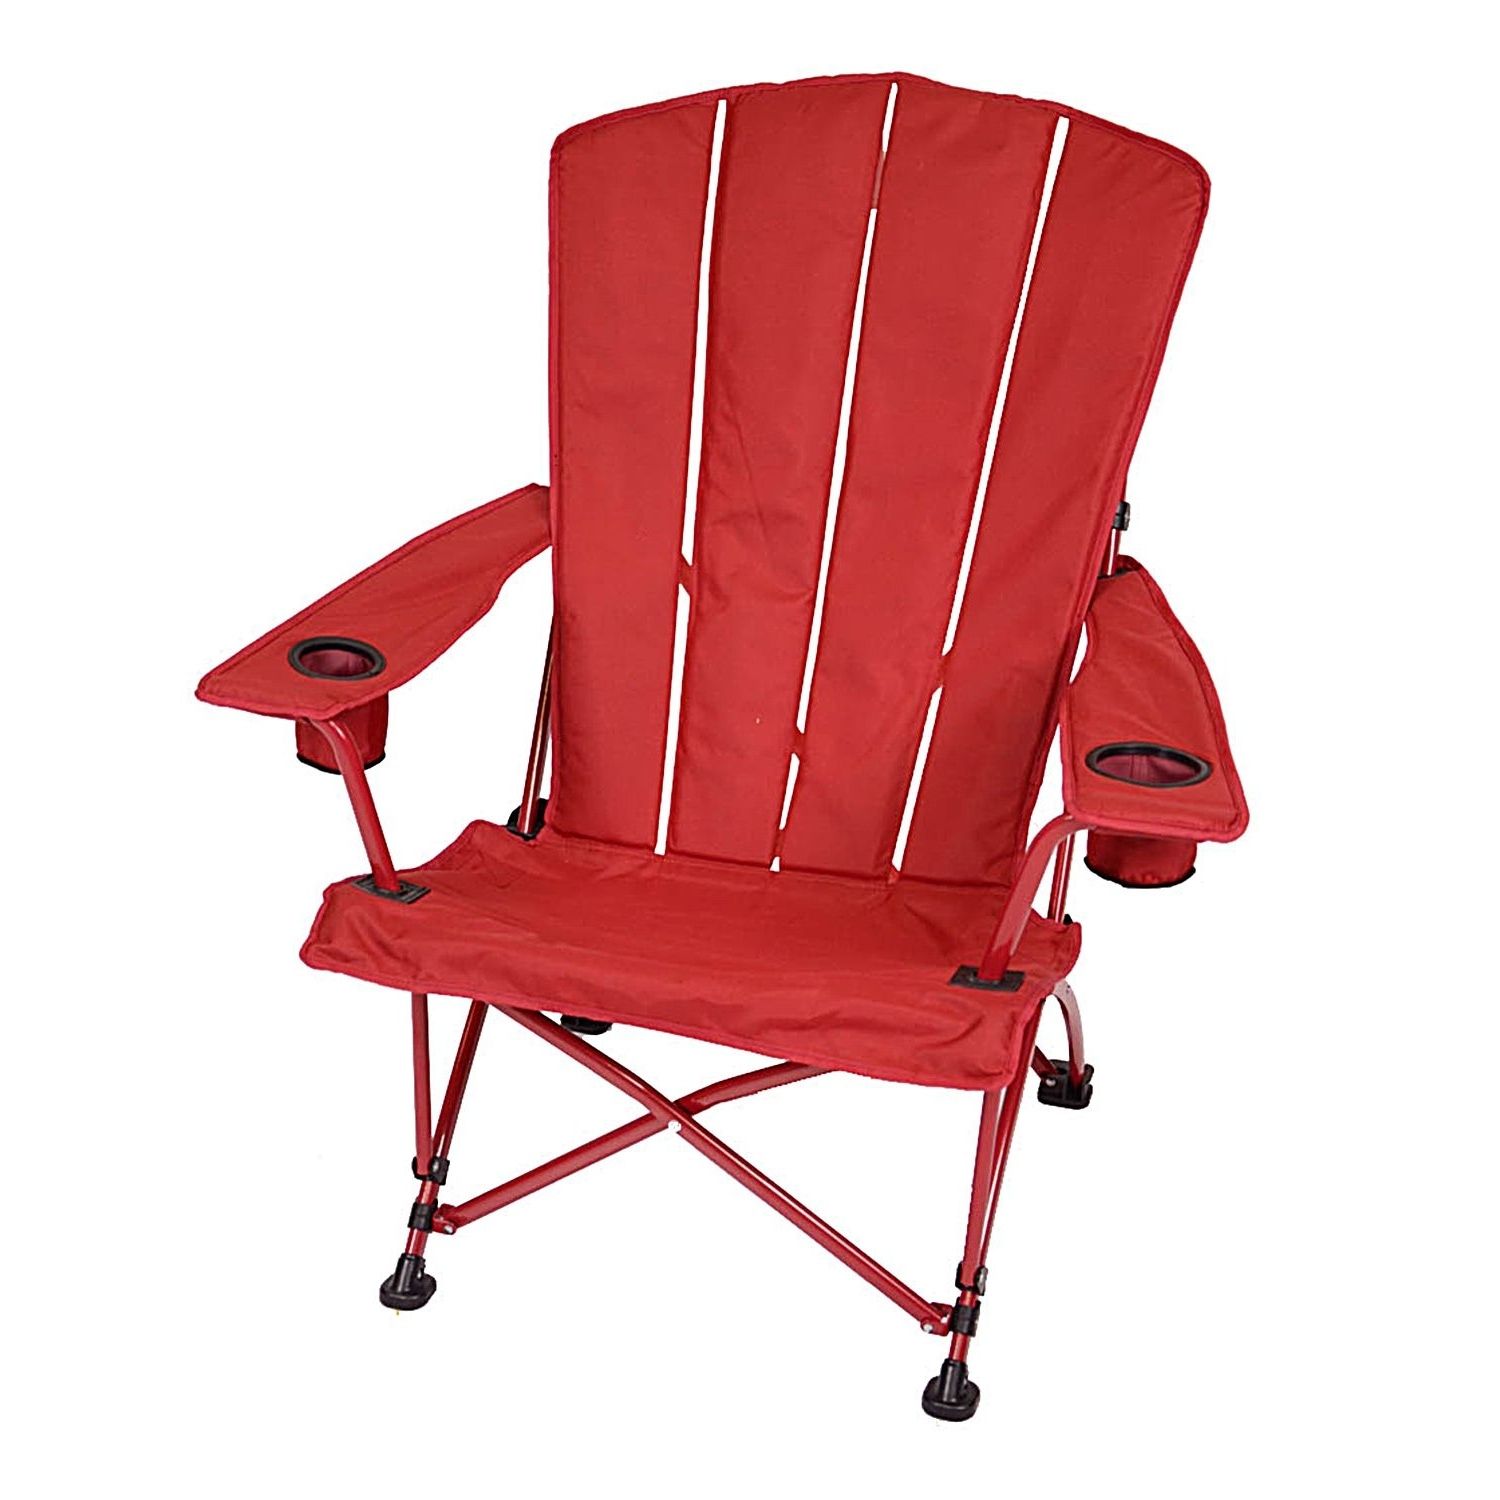 Newest Foldable Adirondack Chair – Red – Sam's Club Most Comfortable Camp For Sam's Club Chaise Lounge Chairs (View 14 of 15)